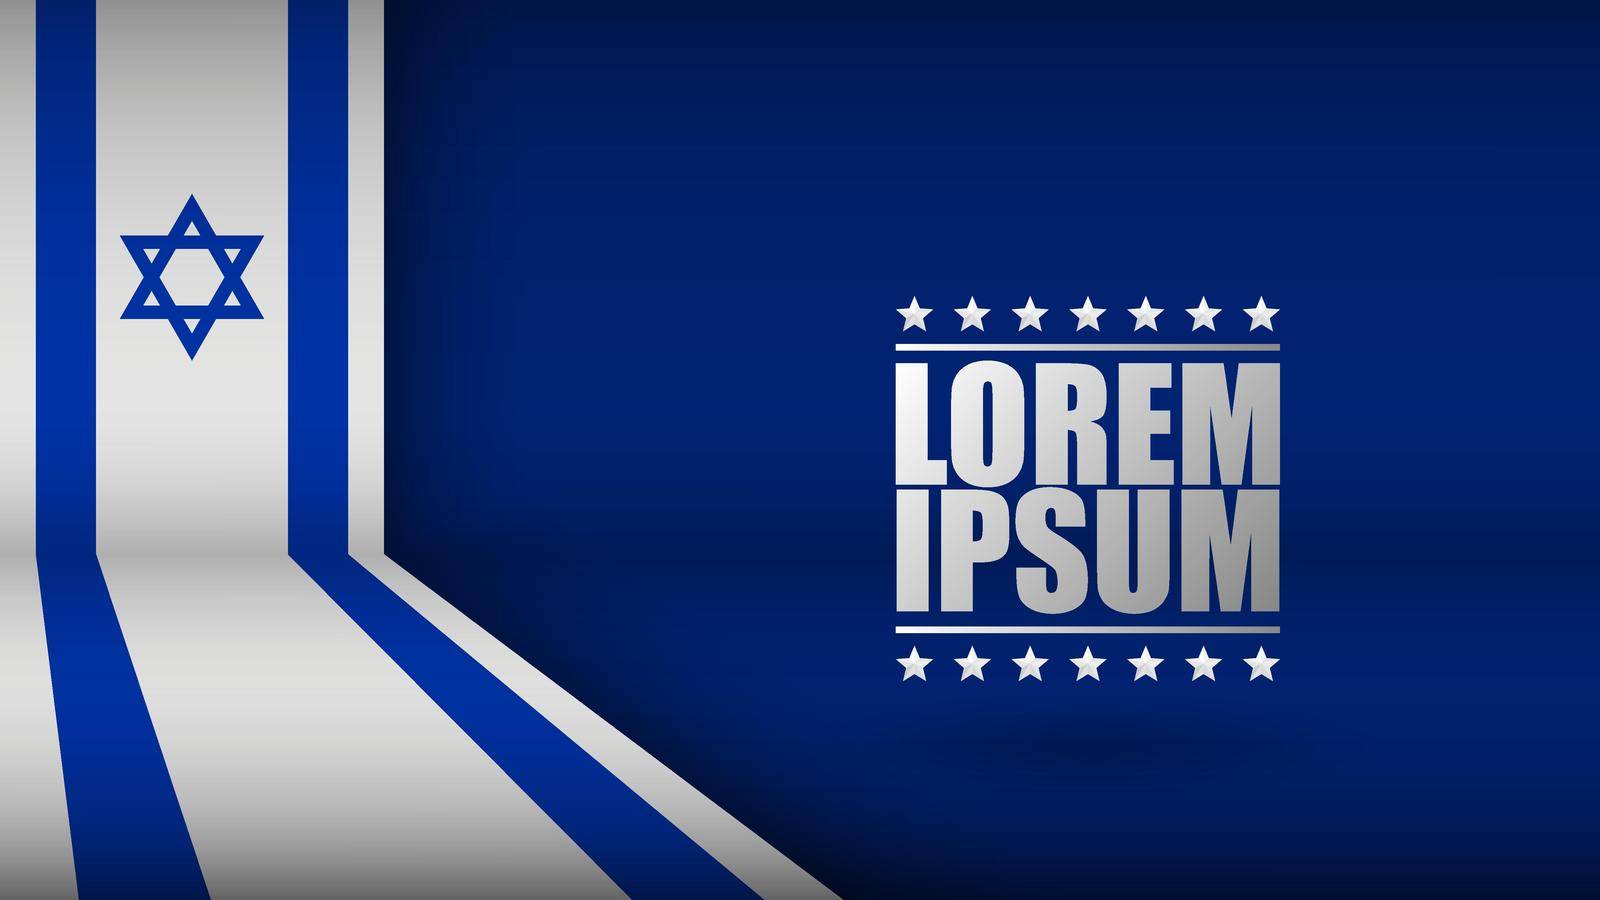 EPS10 Vector Patriotic Background with Israel flag colors. An element of impact for the use you want to make of it.